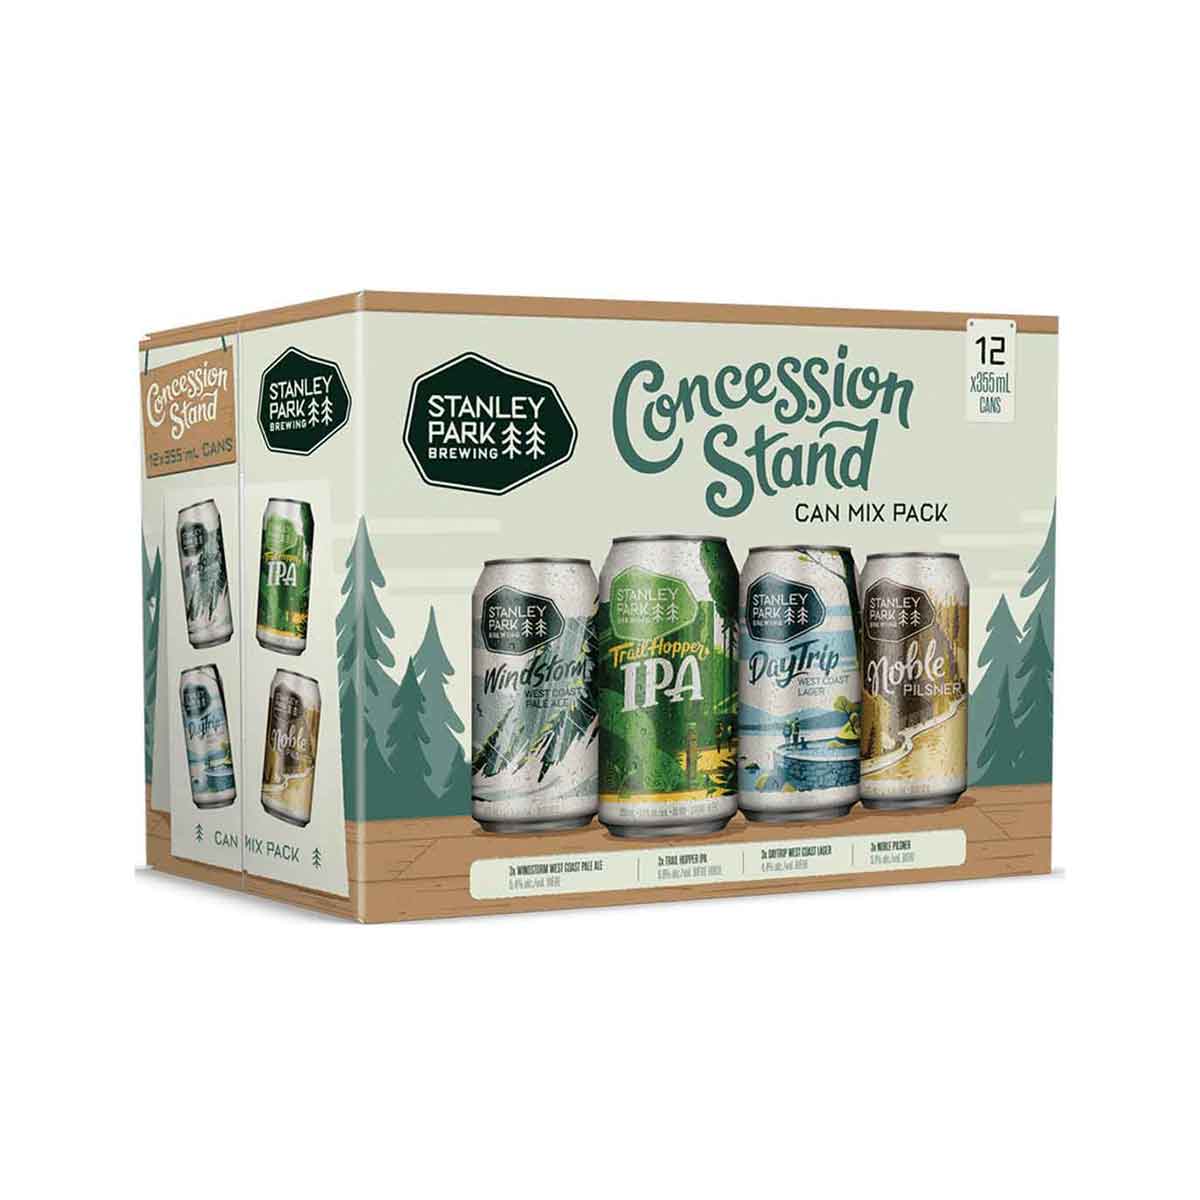 http://tagliquorstores.com/cdn/shop/products/Stanley-Park-Brewing-Concession-Stand-Mix-Pack-12-Cans.jpg?v=1650159671